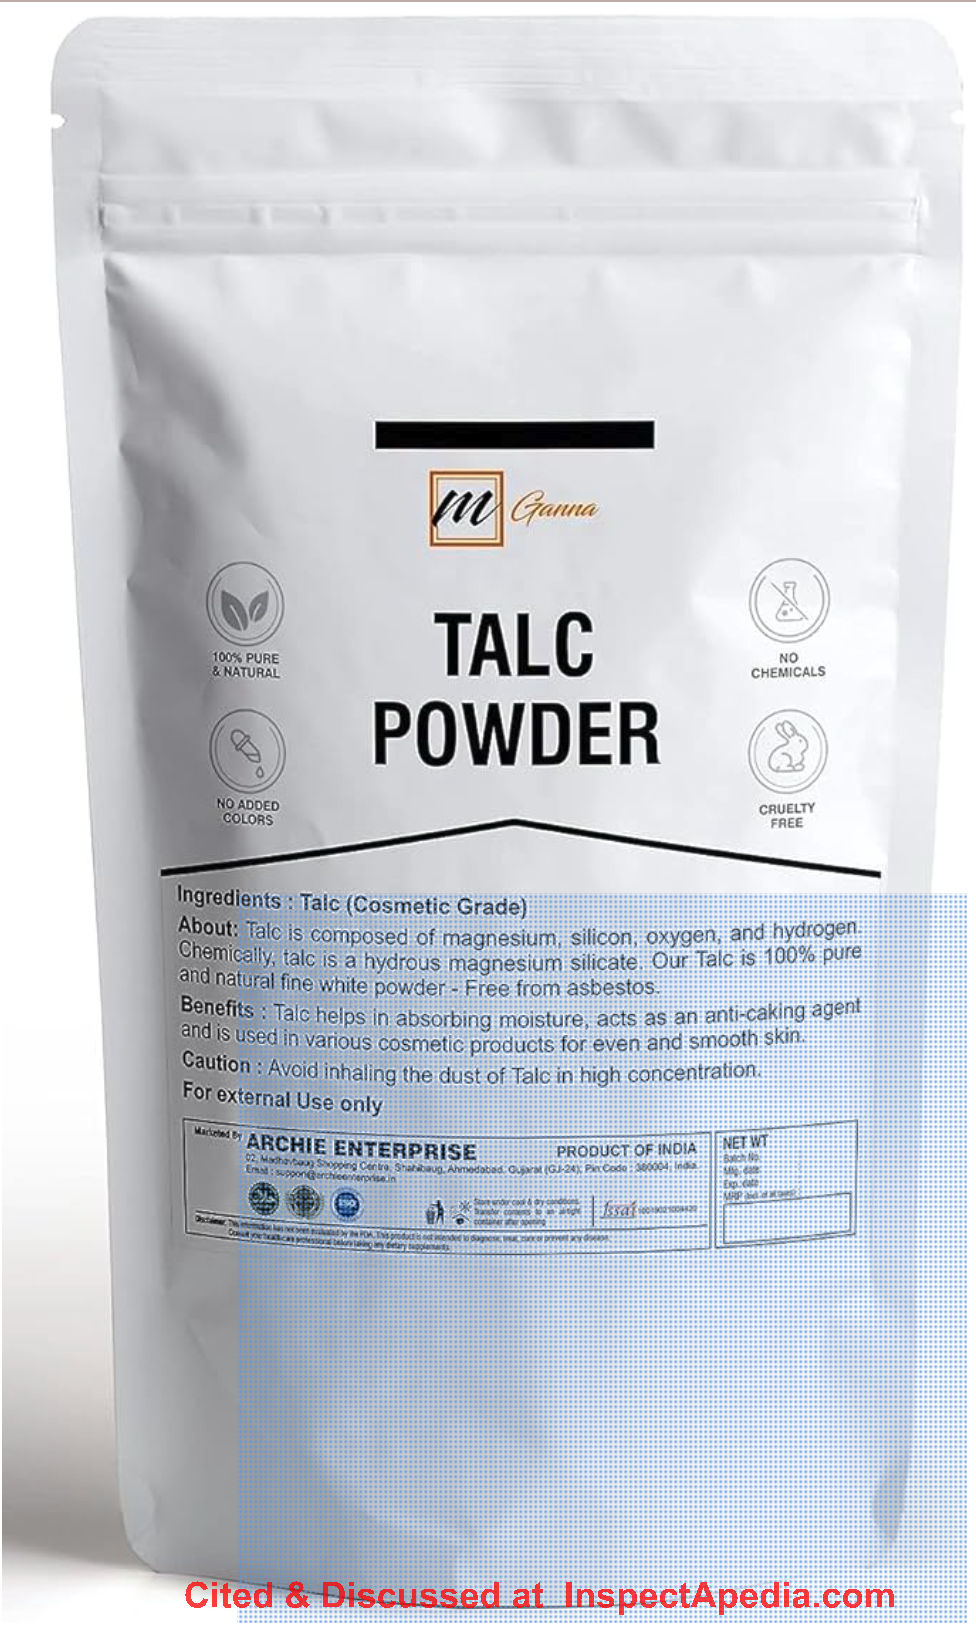 mGanna pure talc powder sold for use in makeup formlation - cited & discussed at InspectApedia.com